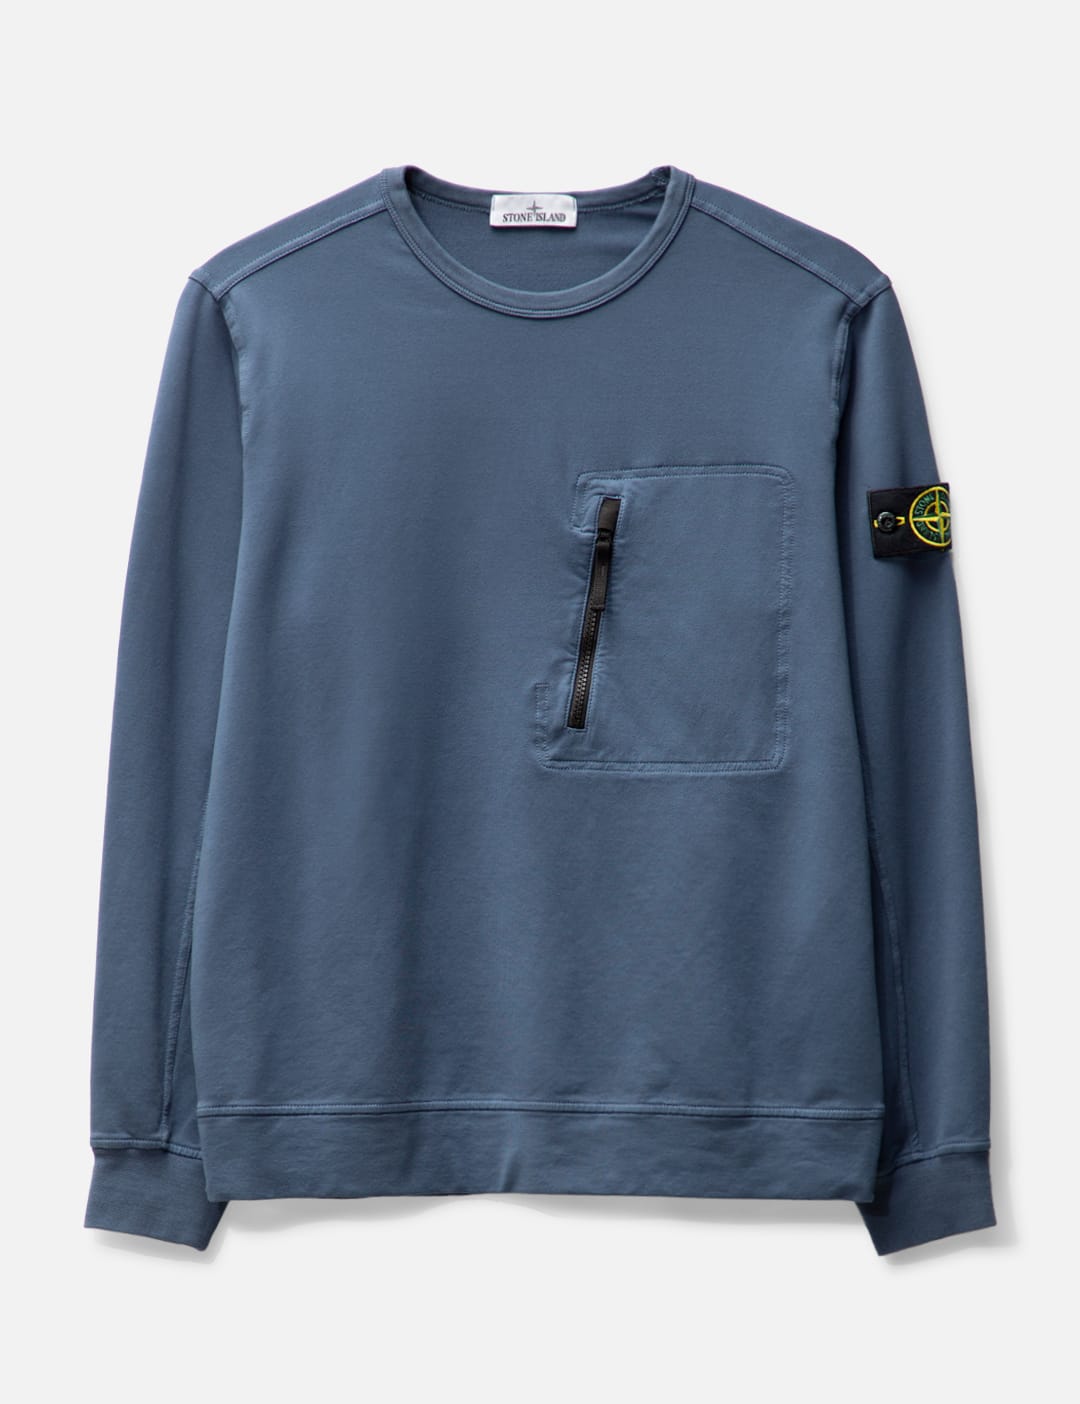 Stone Island - Ghost Overshirt | HBX - Globally Curated Fashion 